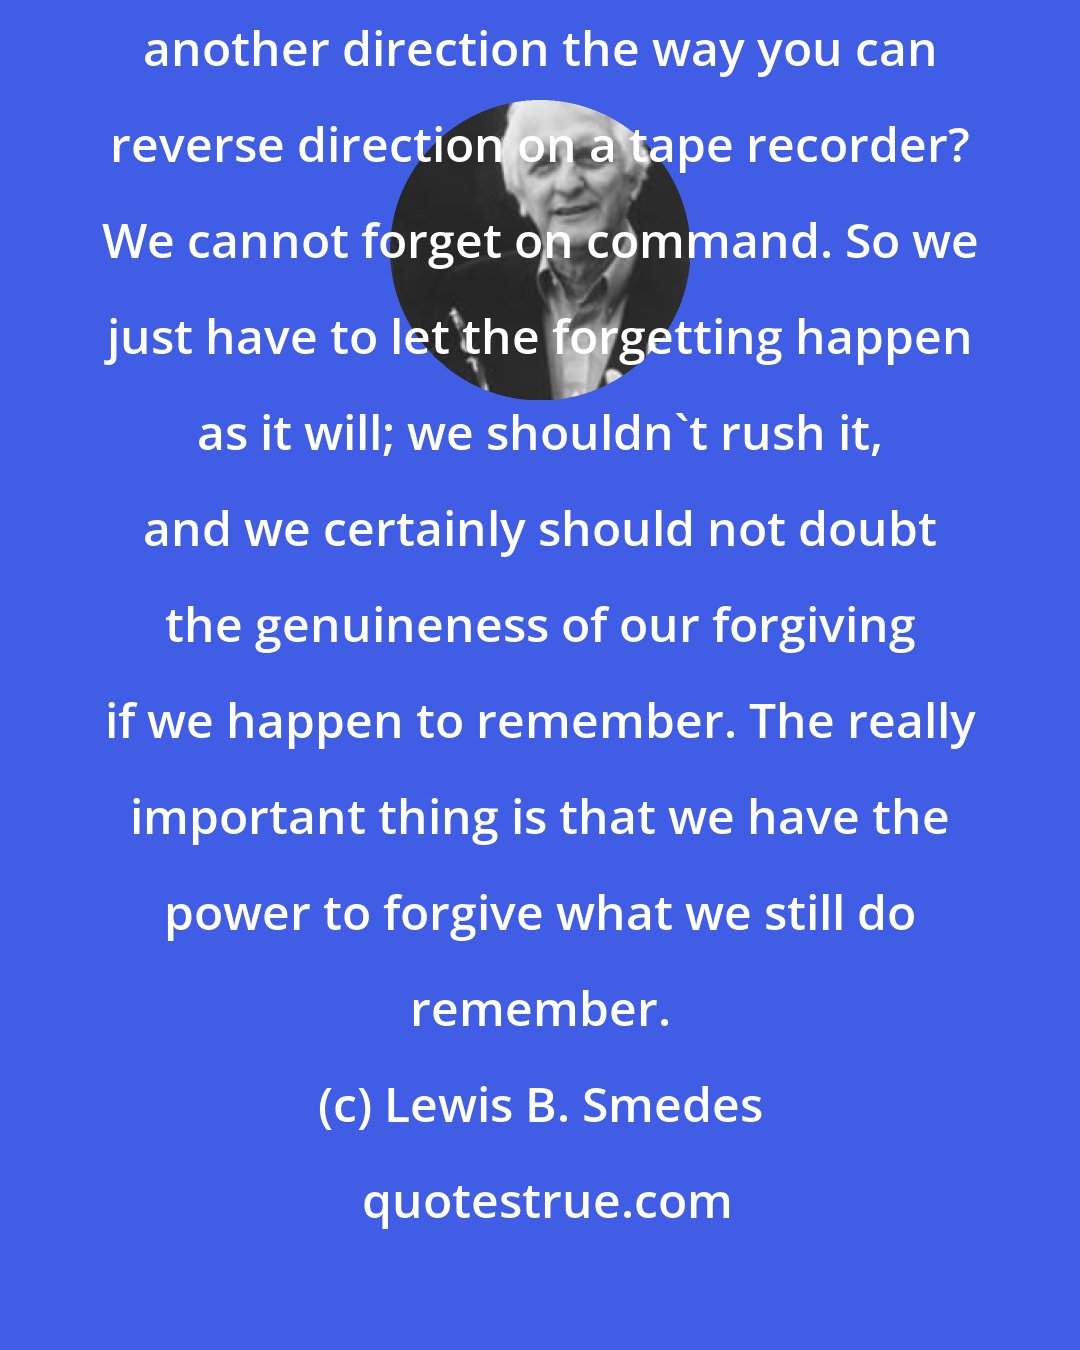 Lewis B. Smedes: Can you stop your memory on a dime, put it in reverse, and spin it in another direction the way you can reverse direction on a tape recorder? We cannot forget on command. So we just have to let the forgetting happen as it will; we shouldn't rush it, and we certainly should not doubt the genuineness of our forgiving if we happen to remember. The really important thing is that we have the power to forgive what we still do remember.